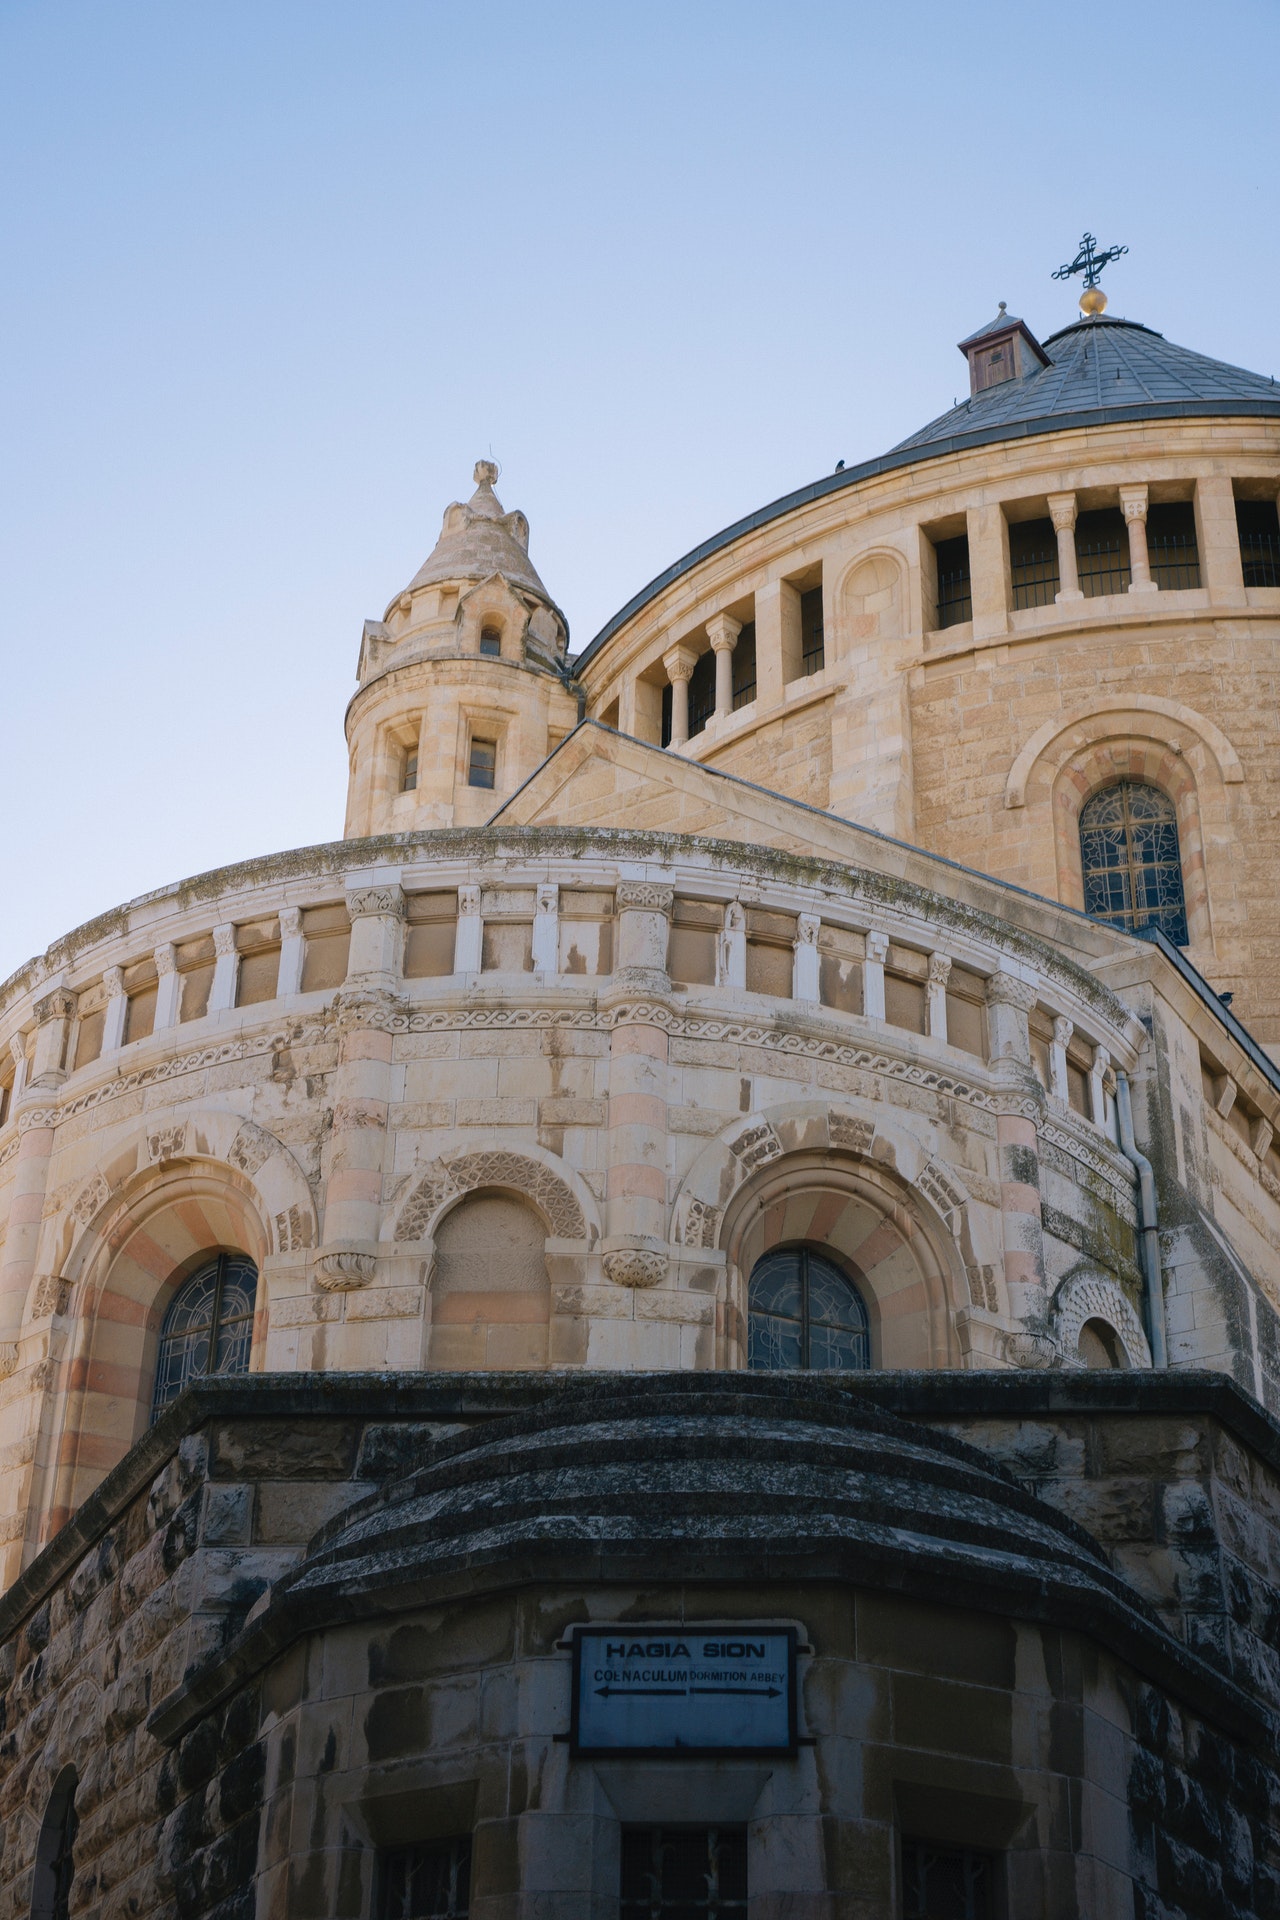 Dormition Abbey. Photo by Haley Black from Pexels